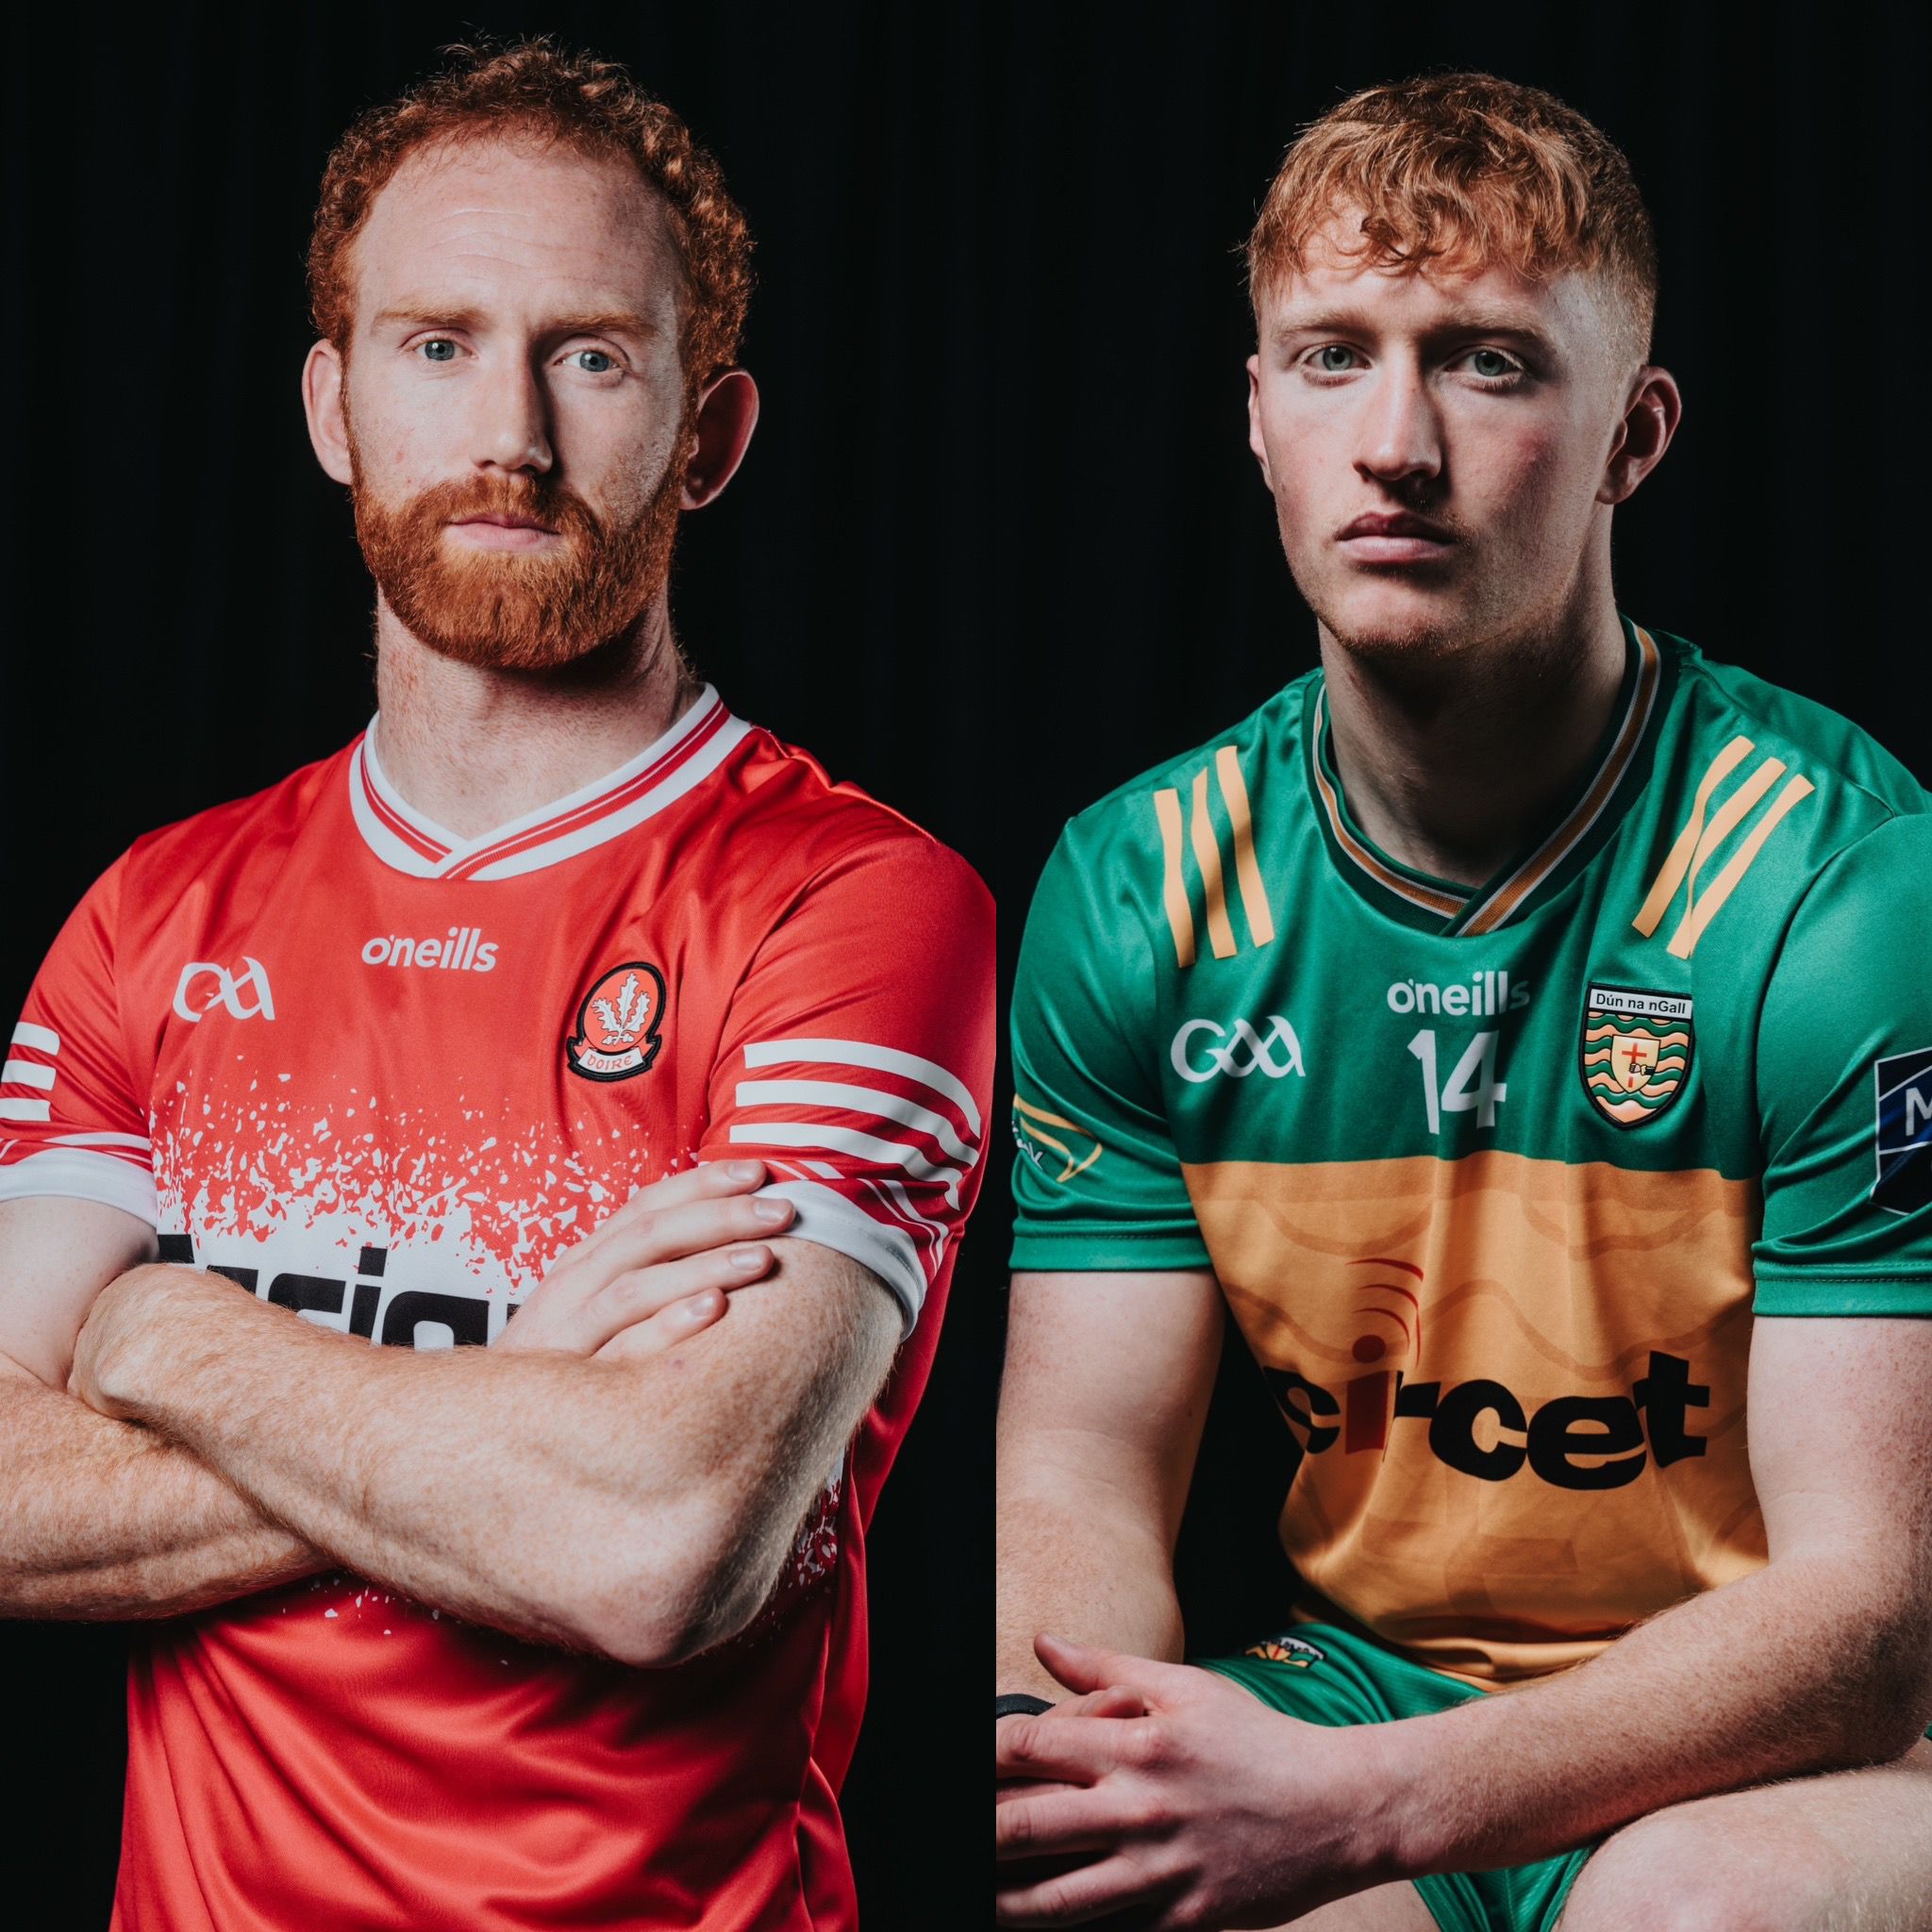 Ulster SFC: Derry v Donegal – Match Preview, Pivotal Players and Previous Meetings